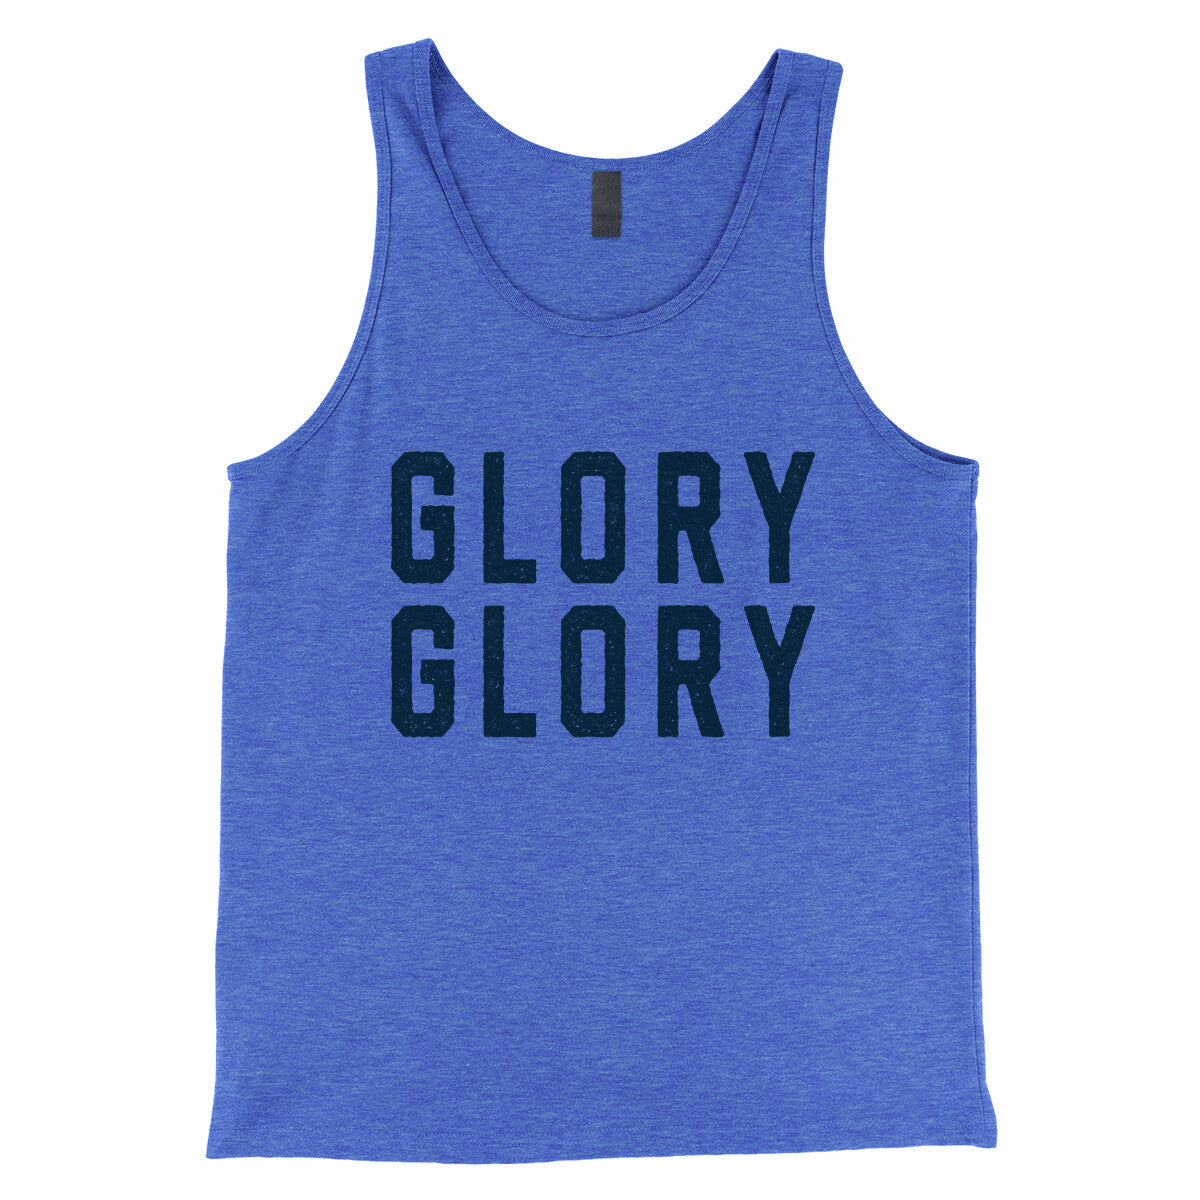 Glory Glory in True Royal TriBlend Color